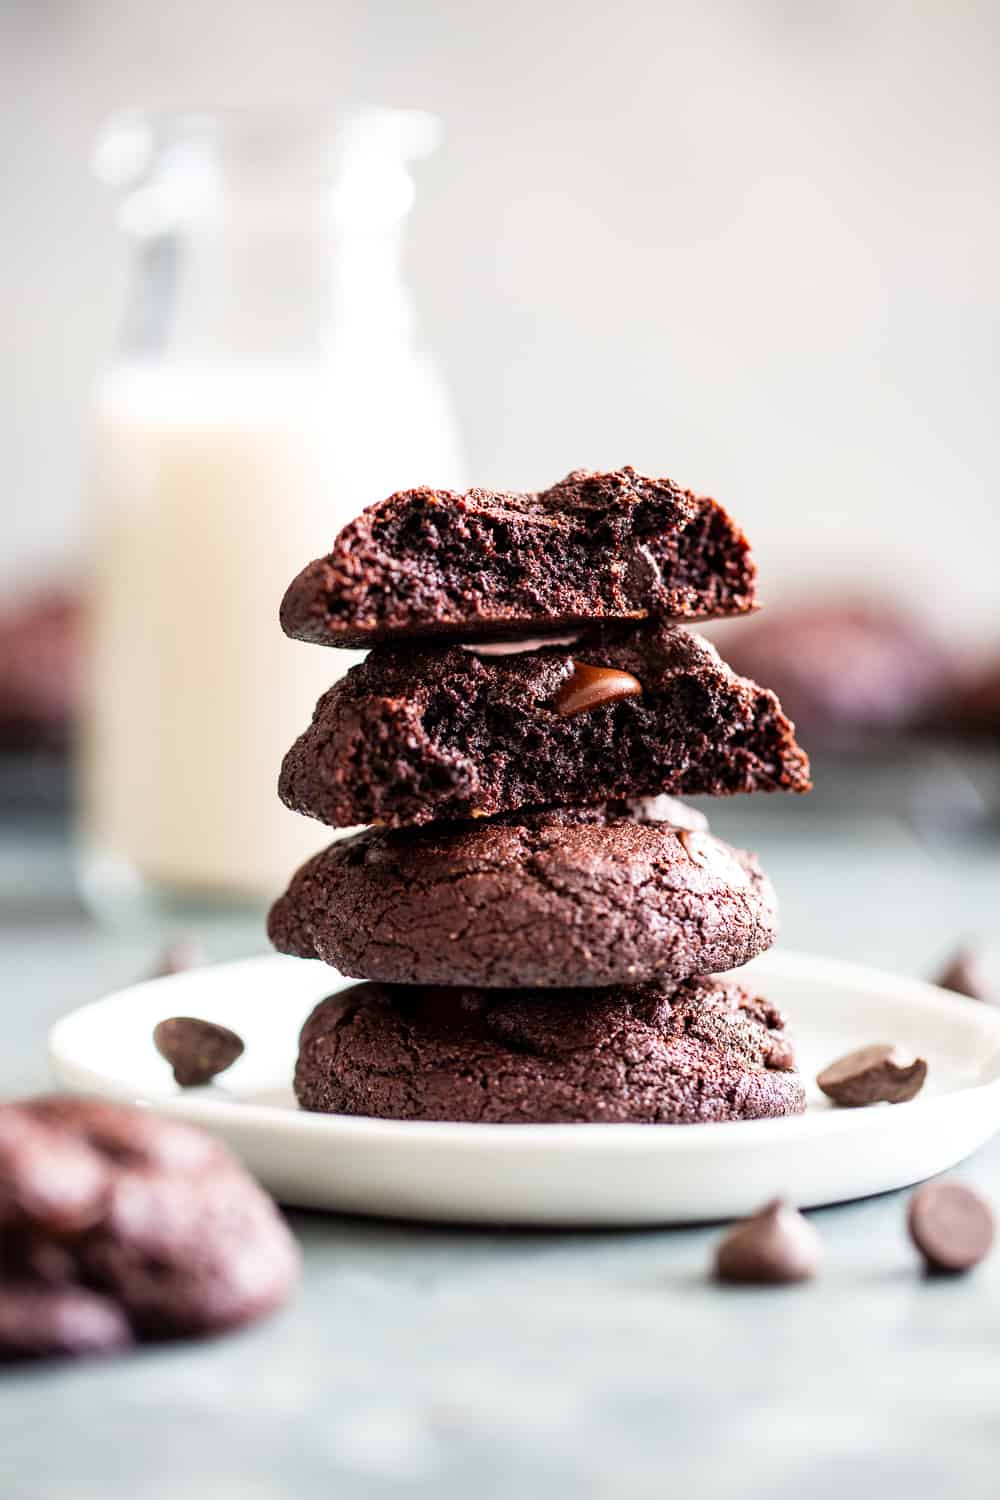 These ultra chocolatey, chewy brownie cookies are based on my paleo brownie recipe. They’re crisp outside and fudgy and chewy inside! Perfect for any occasion and the ideal cookie for any chocolate lover! Paleo, gluten free, dairy free, refined sugar free. #paleo #glutenfree #paleobaking #glutenfreebaking #glutenfreecookies